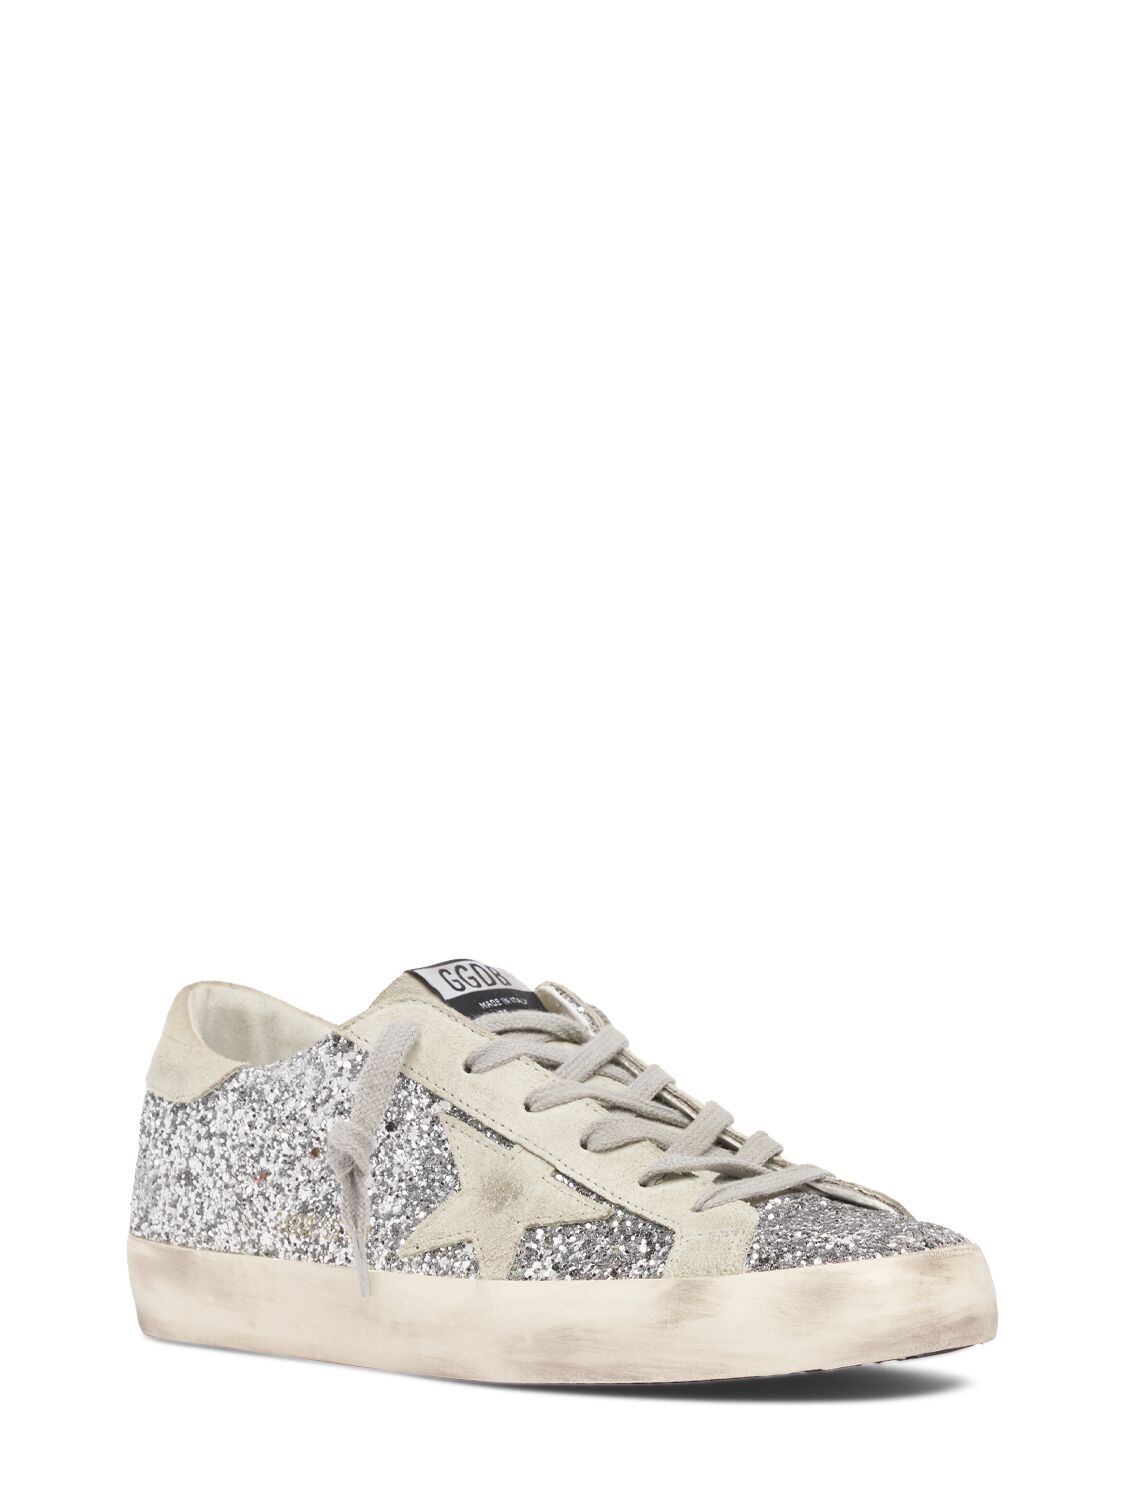 Shop Golden Goose 20mm Super-star Glittered Sneakers In Silver,ice